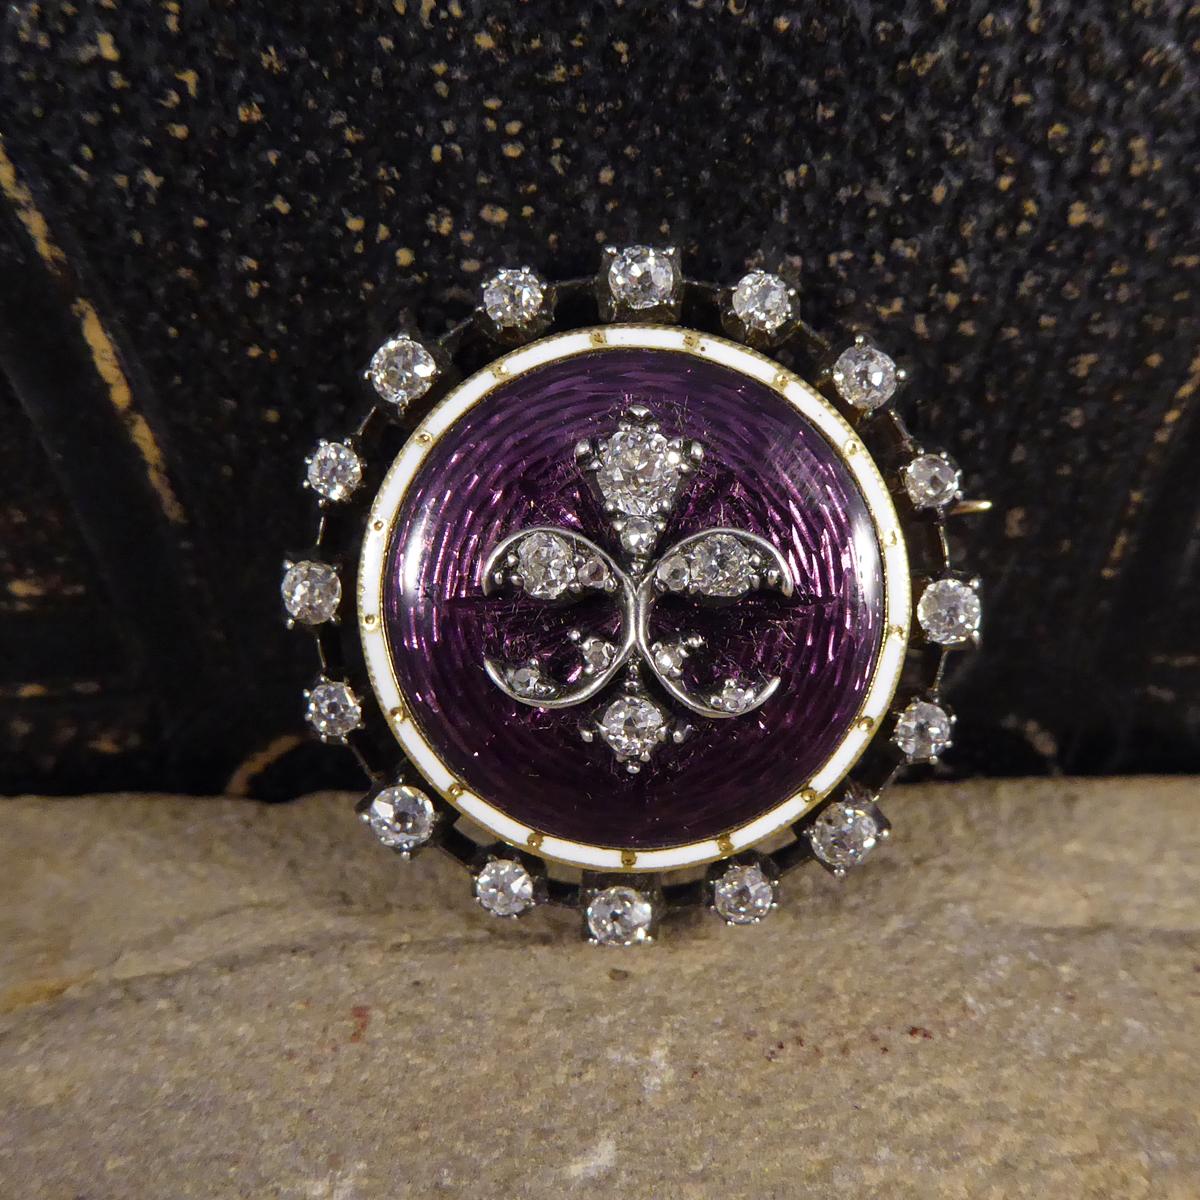 Showing that quality jewellery really does stand the test of time, this gorgeous pristine purple Enamel antique mourning brooch was hand crafted in the Victorian era. This antique brooch is gold backed and silver fronted and has Diamonds adorning as